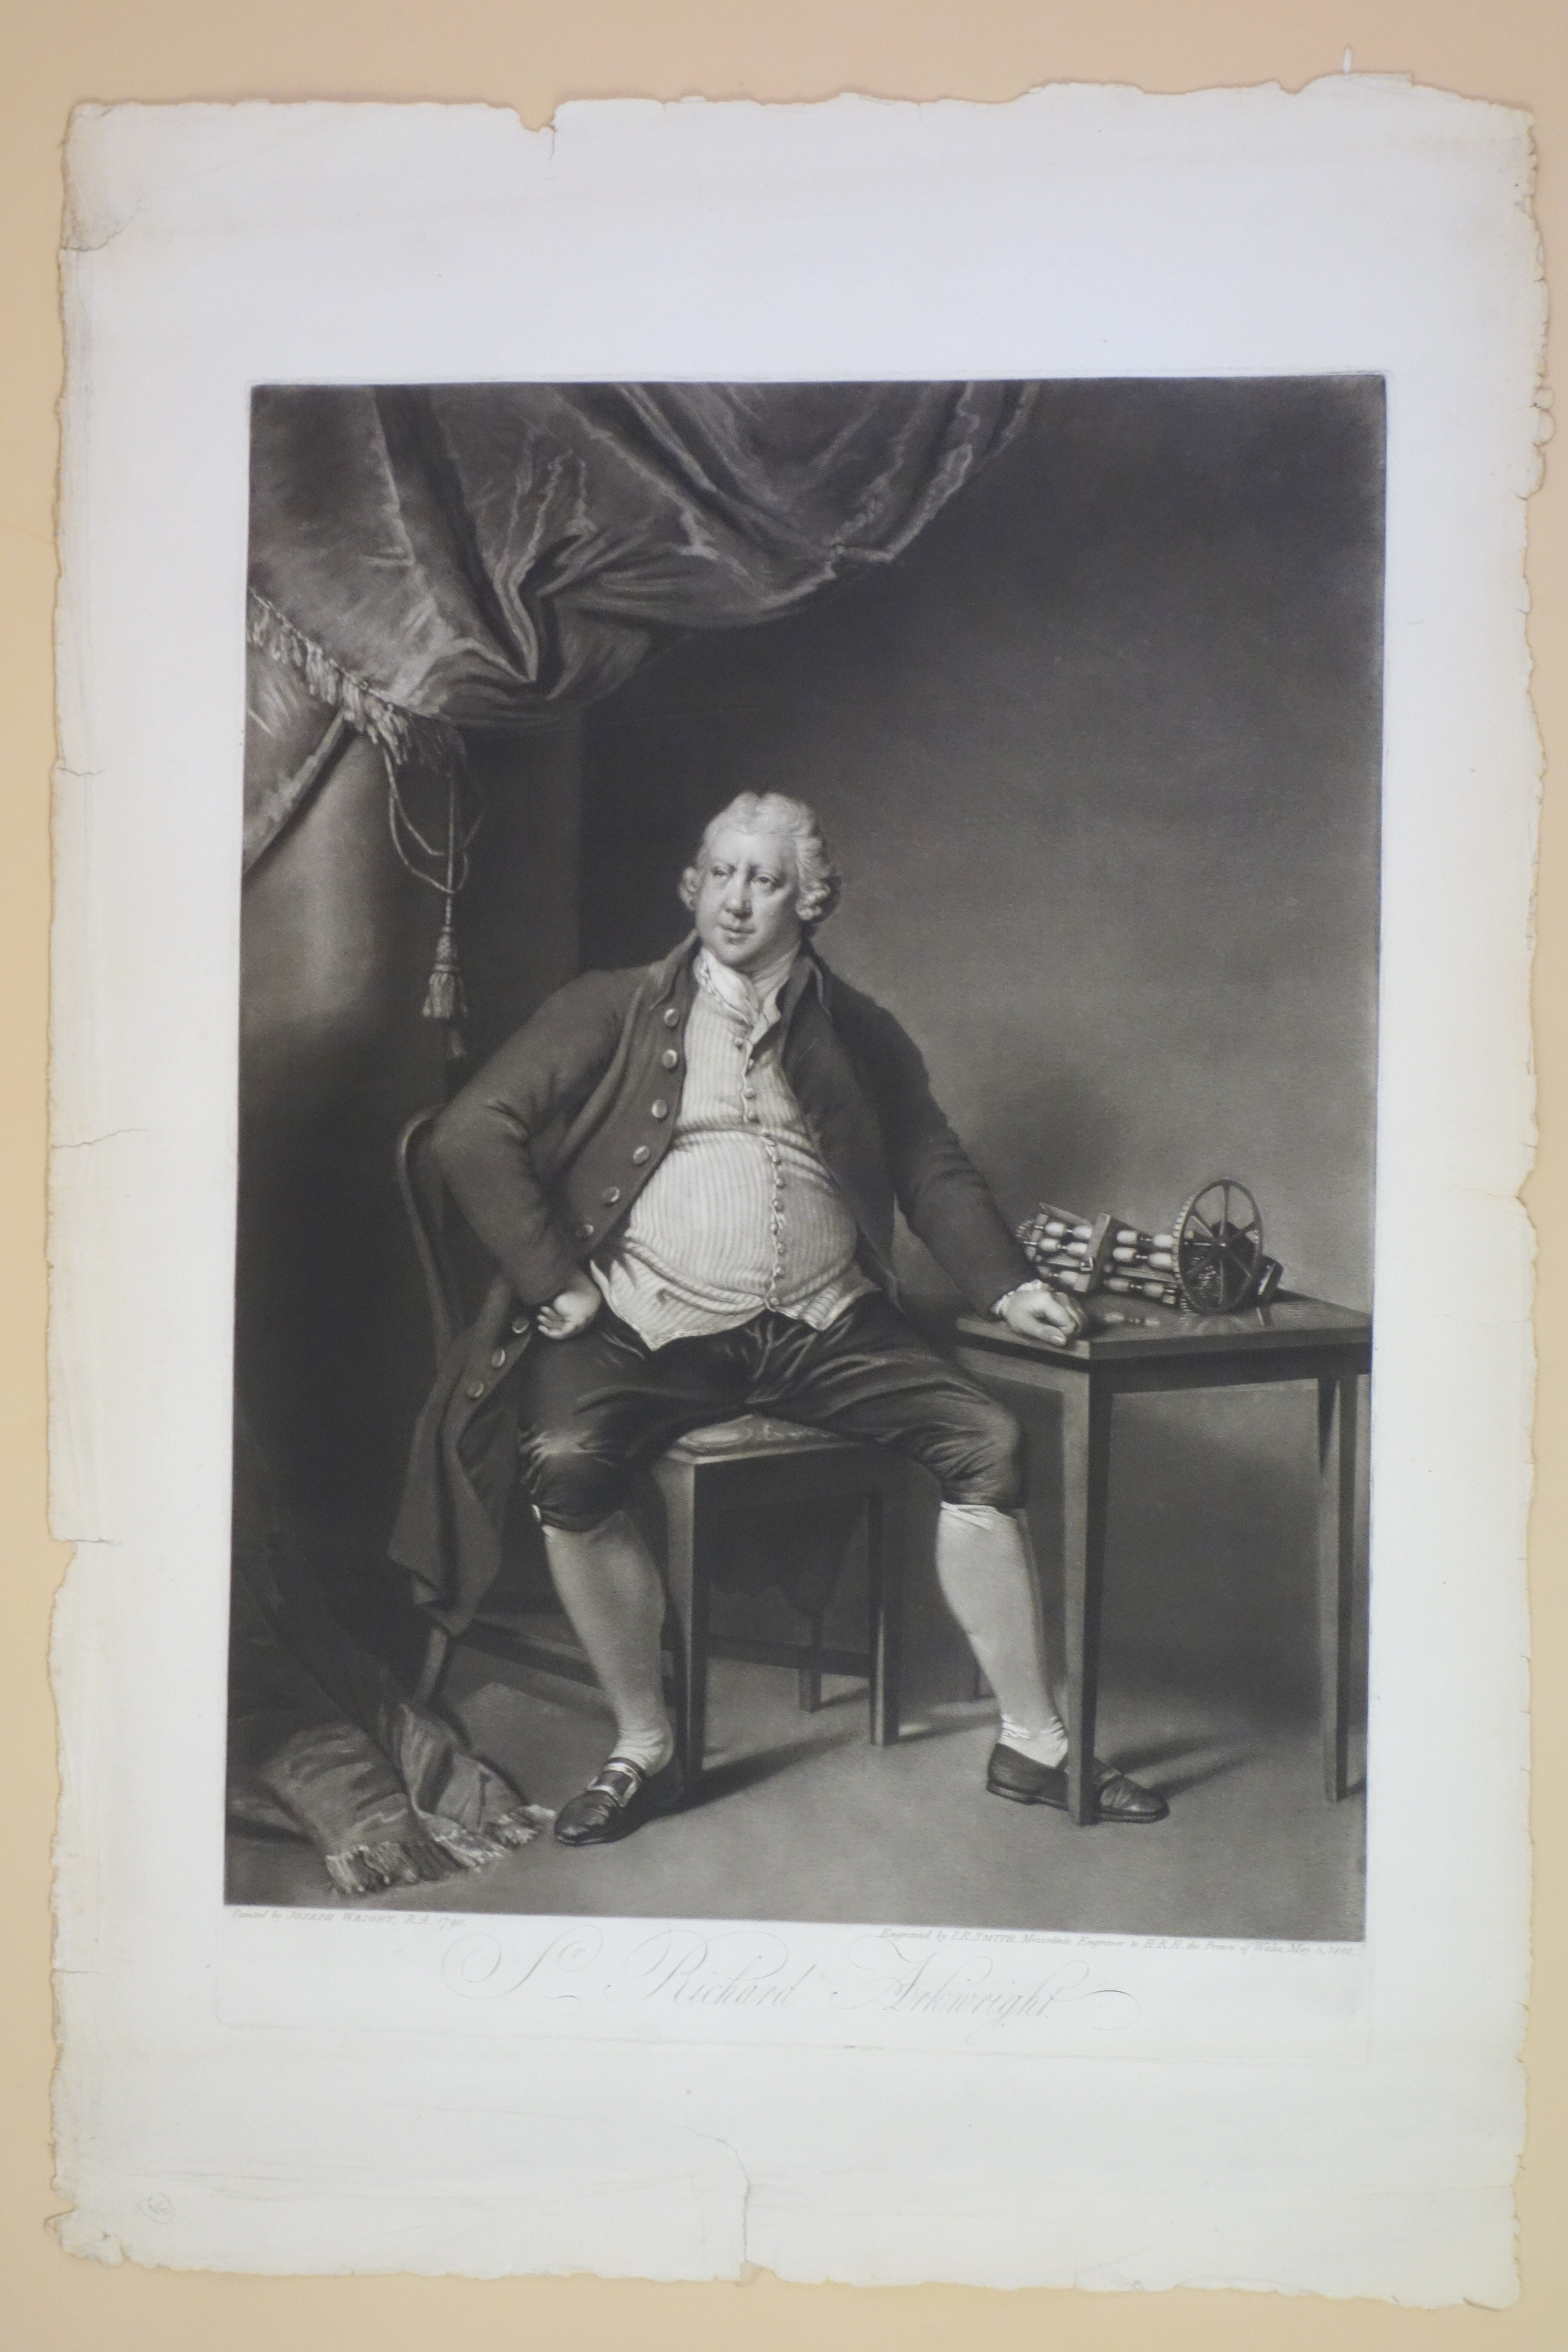 Large folio mezzotint engraved by I. R. Smith of the portrait of Richard Arkwright by Joseph Wright of Derby, 1801. This copy is on an untrimmed sheet.